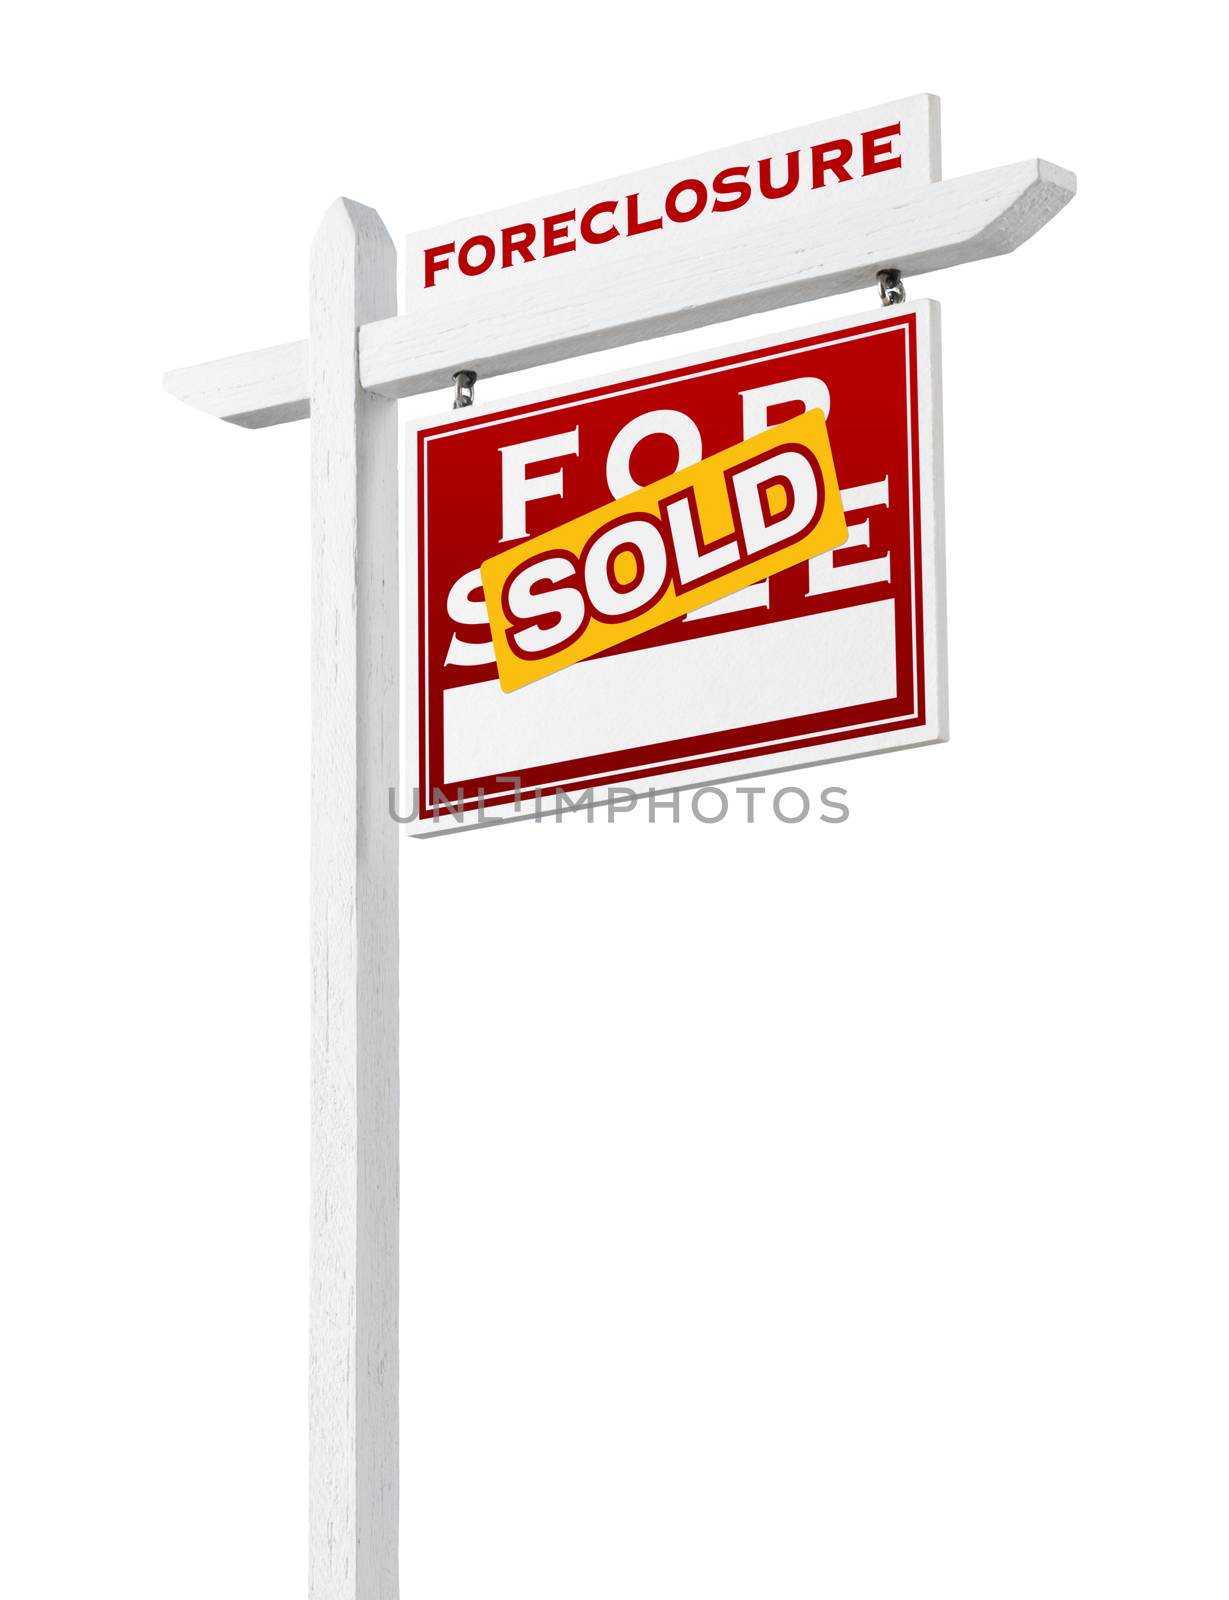 Right Facing Foreclosure Sold For Sale Real Estate Sign Isolated on White.